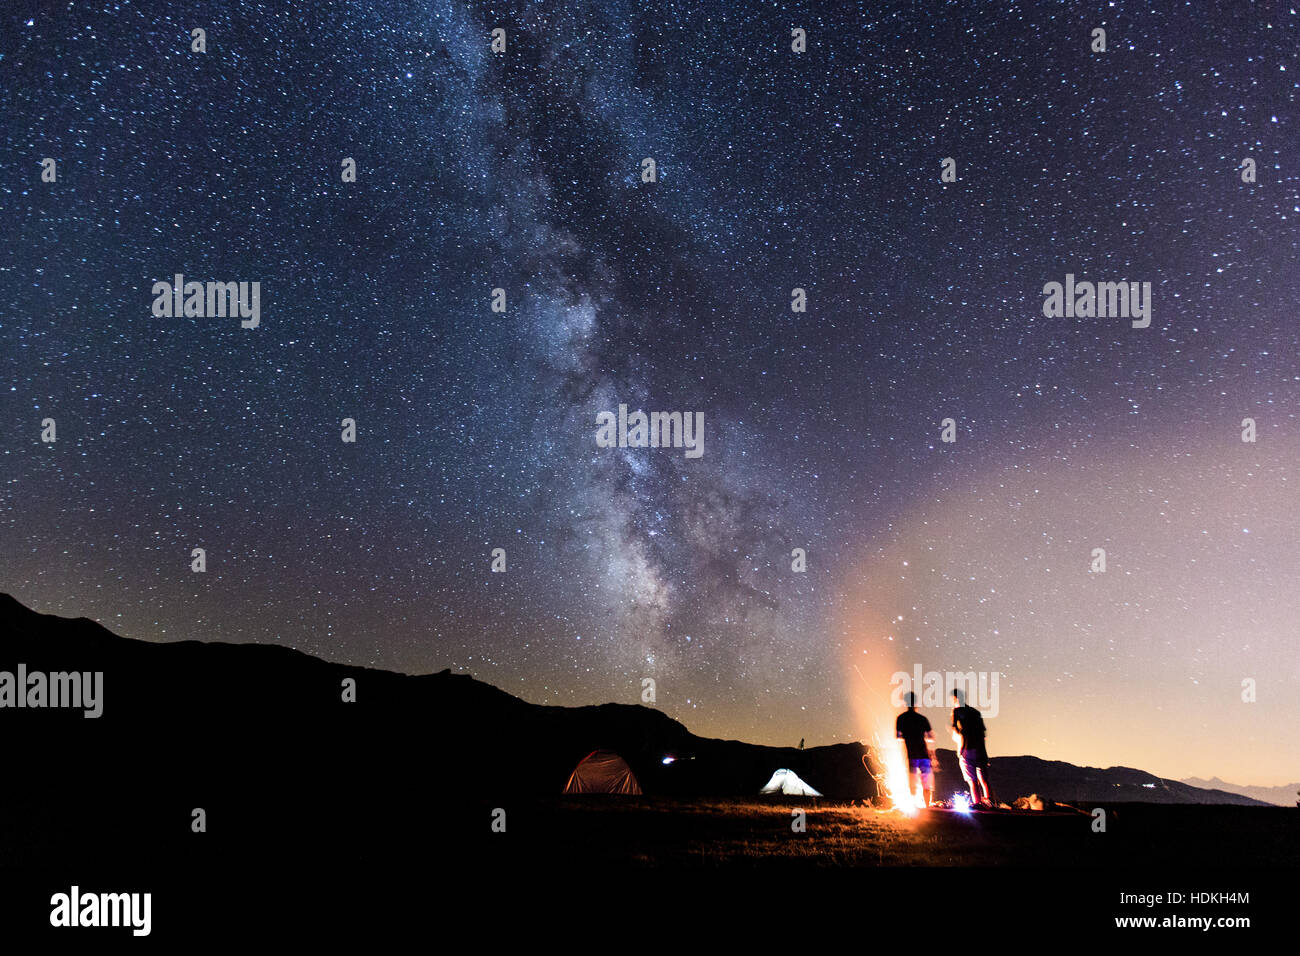 Milky Way. Night sky with stars and silhouette of two man around a fire Stock Photo